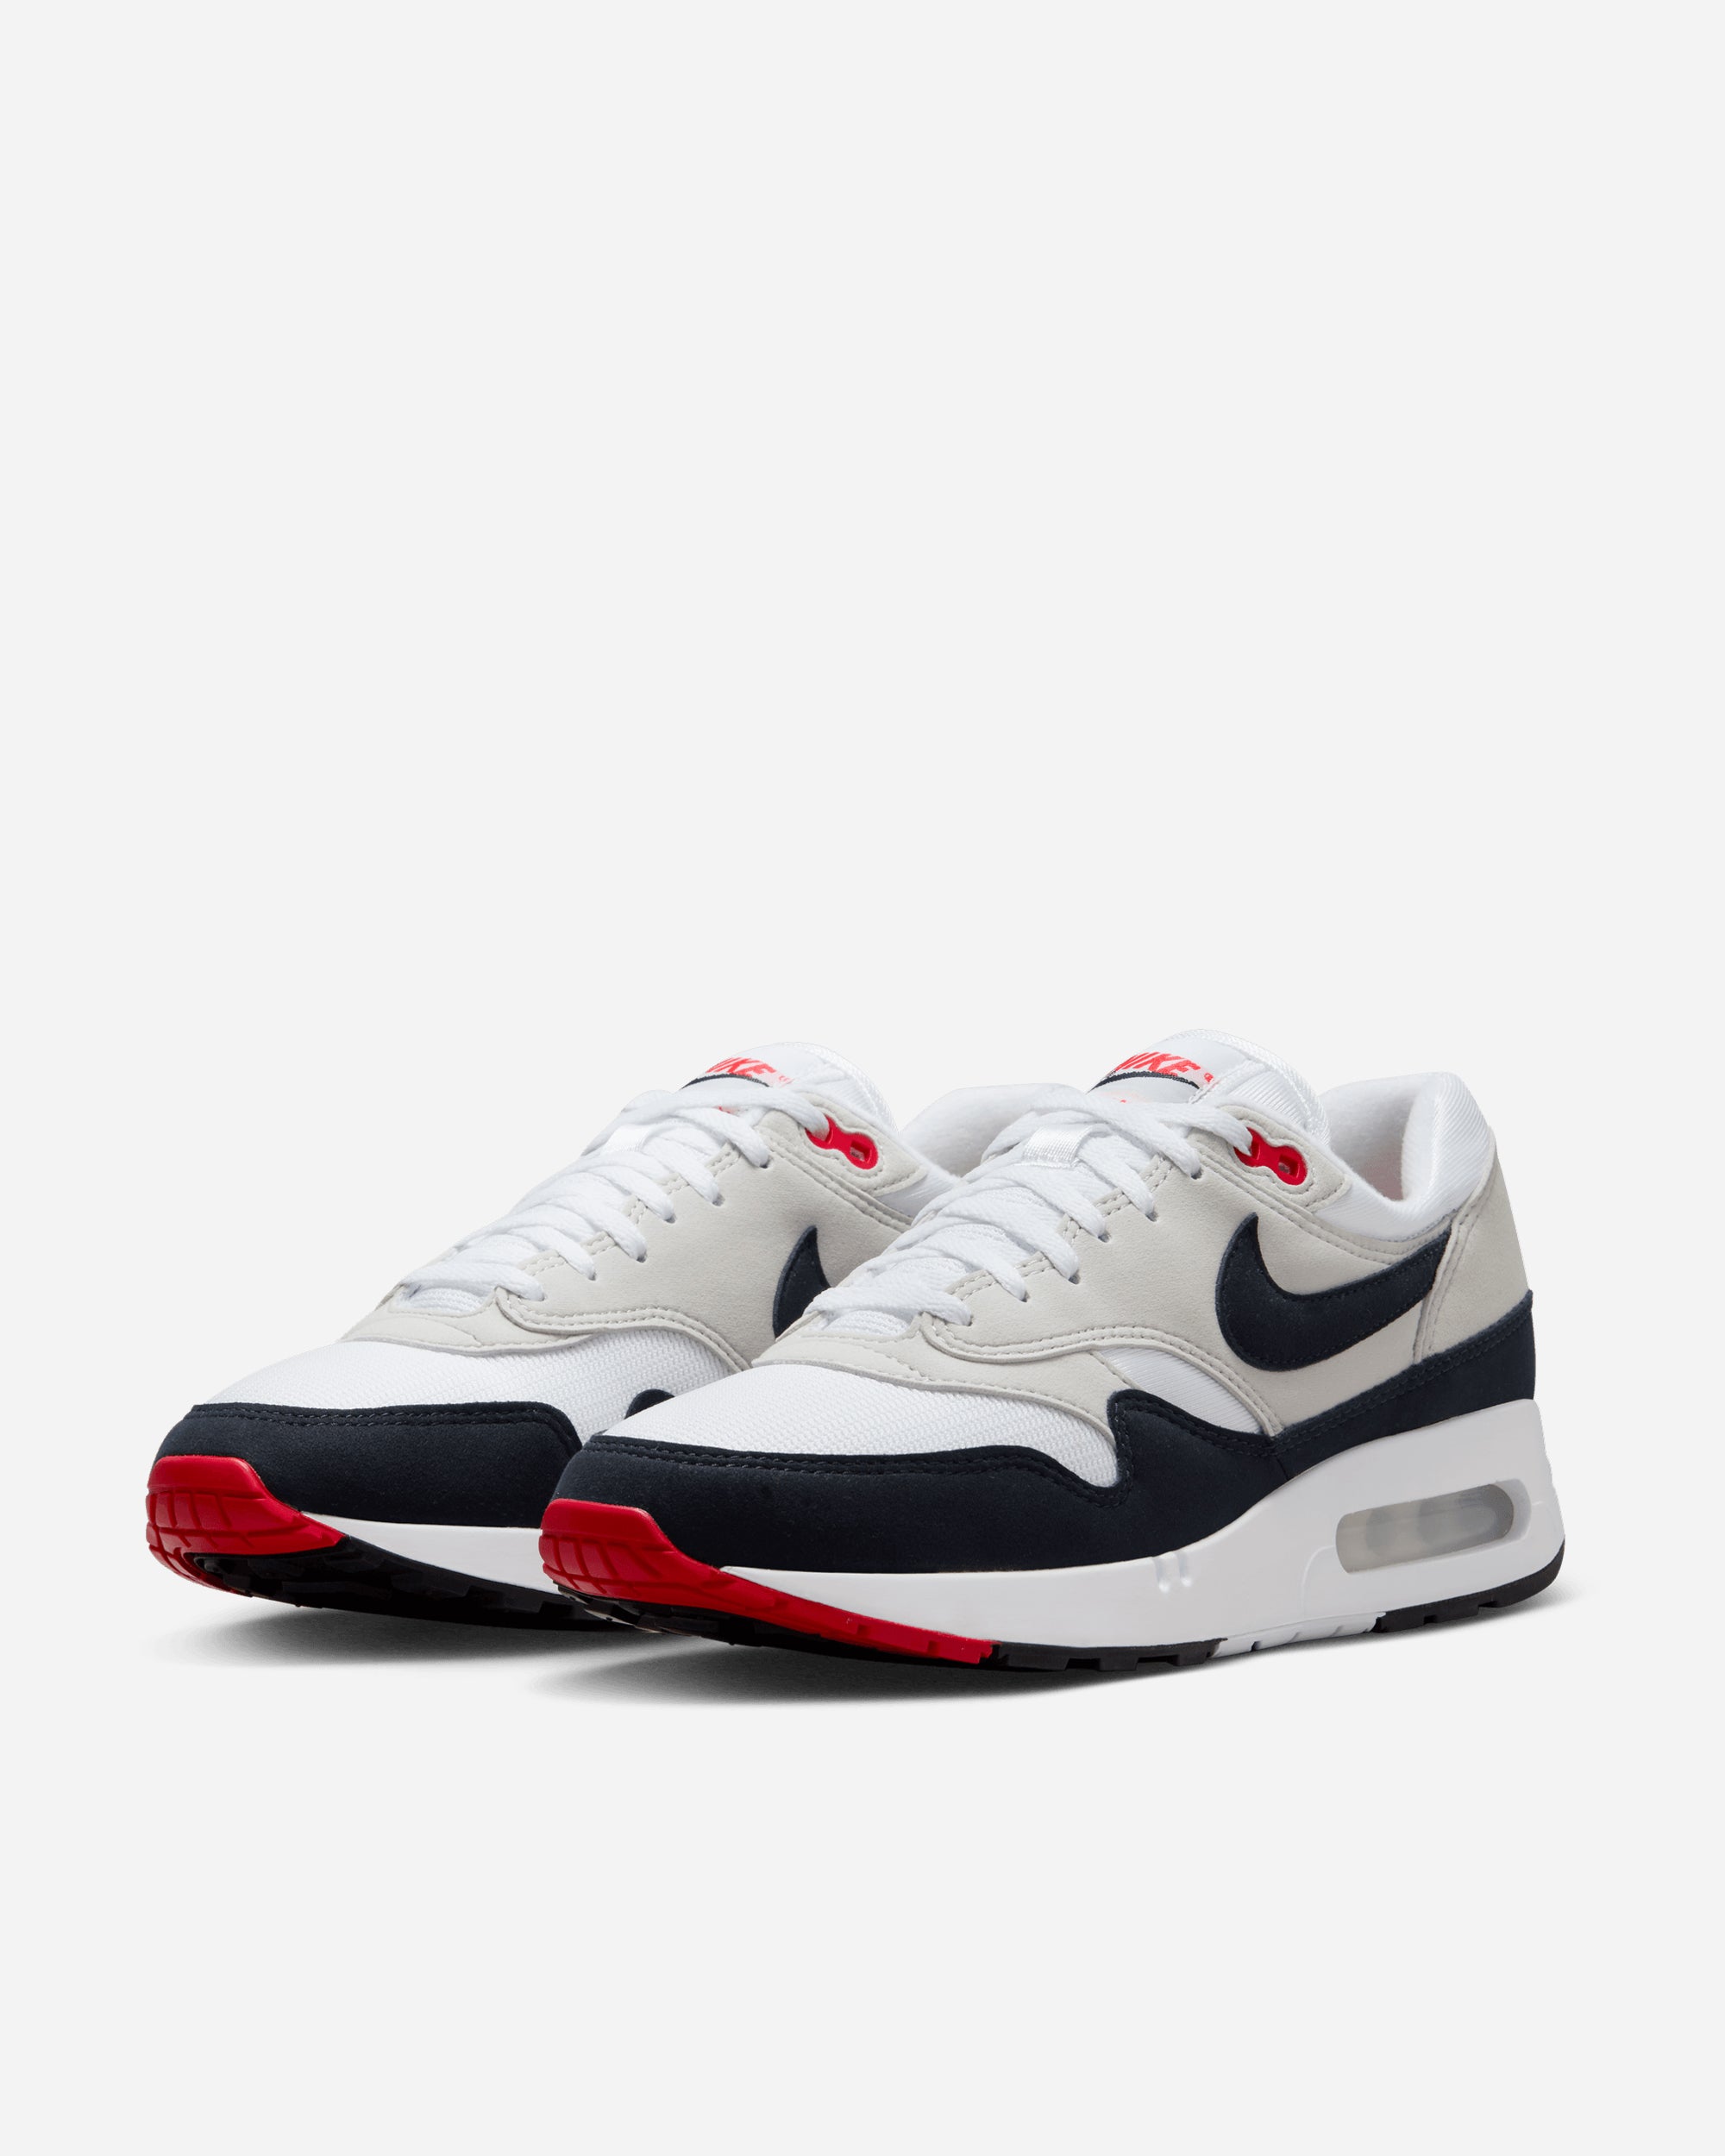 Nike Air Max 1'86 OG 'Big Bubble Sport Red' WHITE/OBSIDIAN-NEUTRAL GREY DQ3989-101